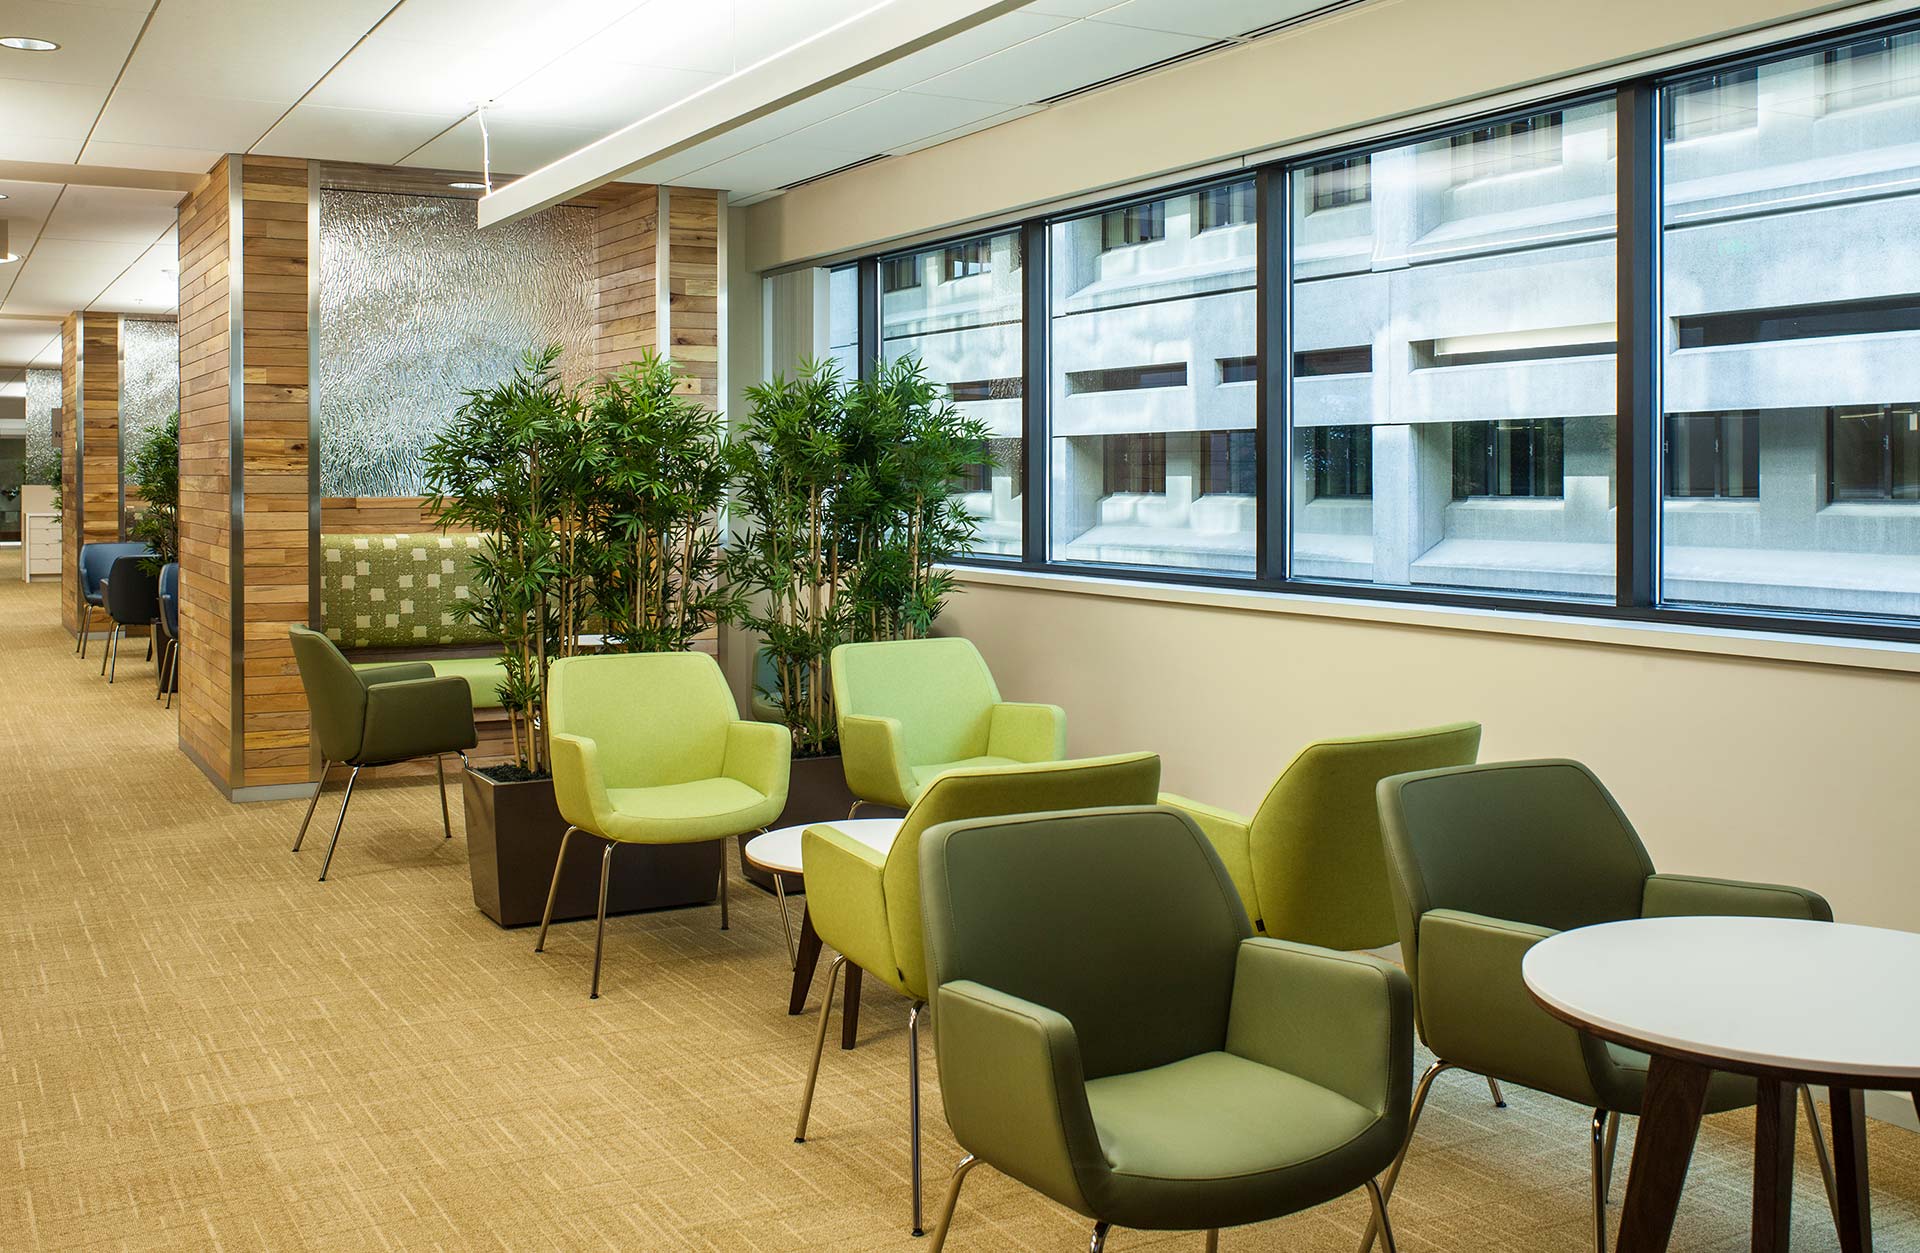 Providence Basecamp Brain and Spine center waiting area